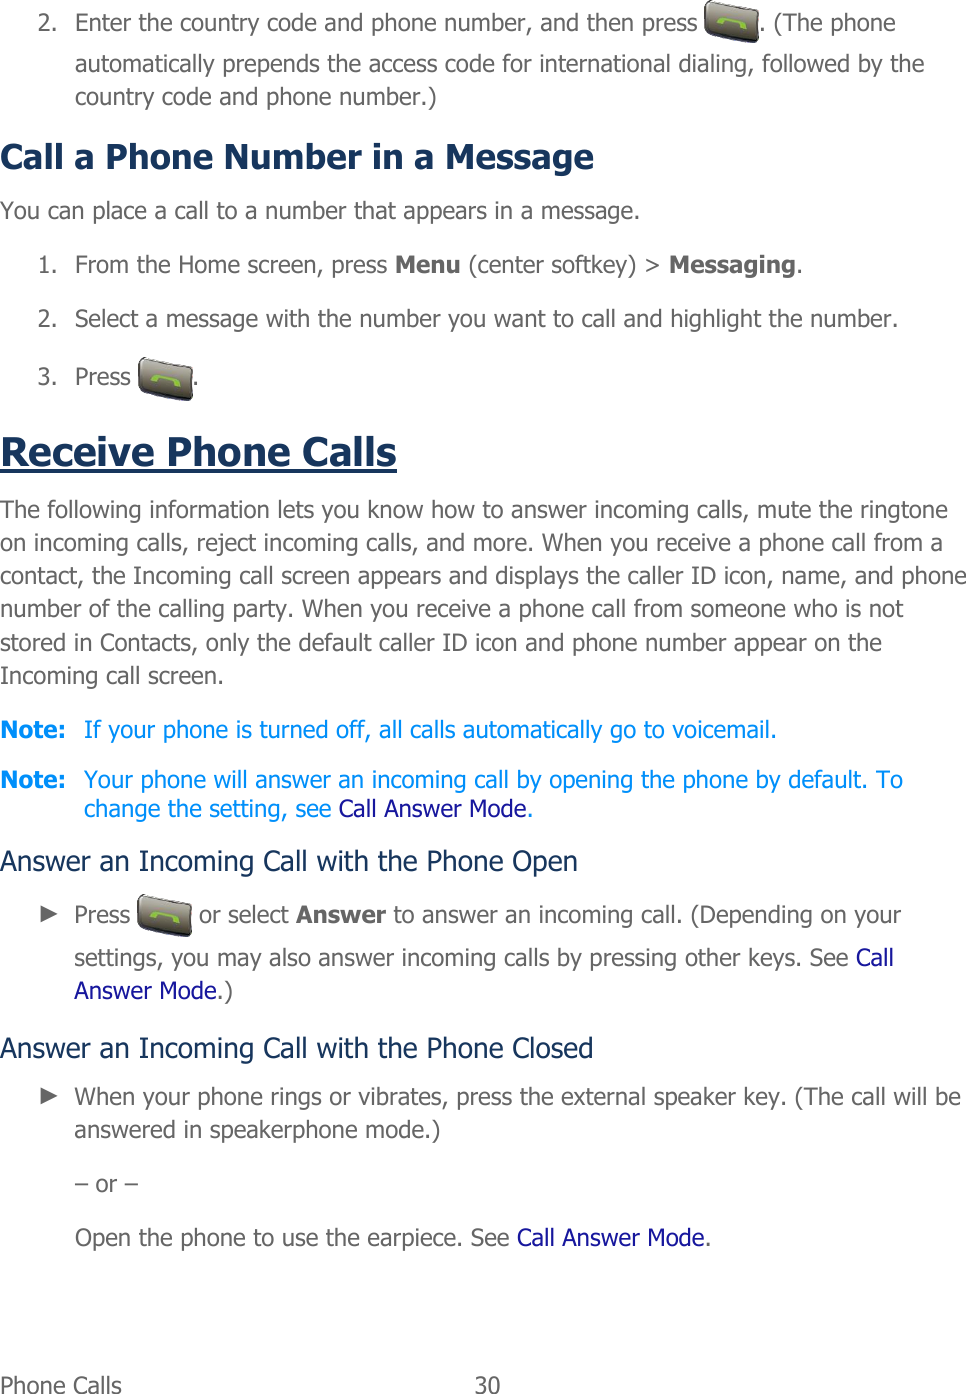  Phone Calls   30   2. Enter the country code and phone number, and then press  . (The phone automatically prepends the access code for international dialing, followed by the country code and phone number.) Call a Phone Number in a Message You can place a call to a number that appears in a message. 1. From the Home screen, press Menu (center softkey) &gt; Messaging. 2. Select a message with the number you want to call and highlight the number. 3. Press  . Receive Phone Calls The following information lets you know how to answer incoming calls, mute the ringtone on incoming calls, reject incoming calls, and more. When you receive a phone call from a contact, the Incoming call screen appears and displays the caller ID icon, name, and phone number of the calling party. When you receive a phone call from someone who is not stored in Contacts, only the default caller ID icon and phone number appear on the Incoming call screen. Note:  If your phone is turned off, all calls automatically go to voicemail. Note:  Your phone will answer an incoming call by opening the phone by default. To change the setting, see Call Answer Mode. Answer an Incoming Call with the Phone Open ► Press   or select Answer to answer an incoming call. (Depending on your settings, you may also answer incoming calls by pressing other keys. See Call Answer Mode.) Answer an Incoming Call with the Phone Closed ► When your phone rings or vibrates, press the external speaker key. (The call will be answered in speakerphone mode.) – or – Open the phone to use the earpiece. See Call Answer Mode. 